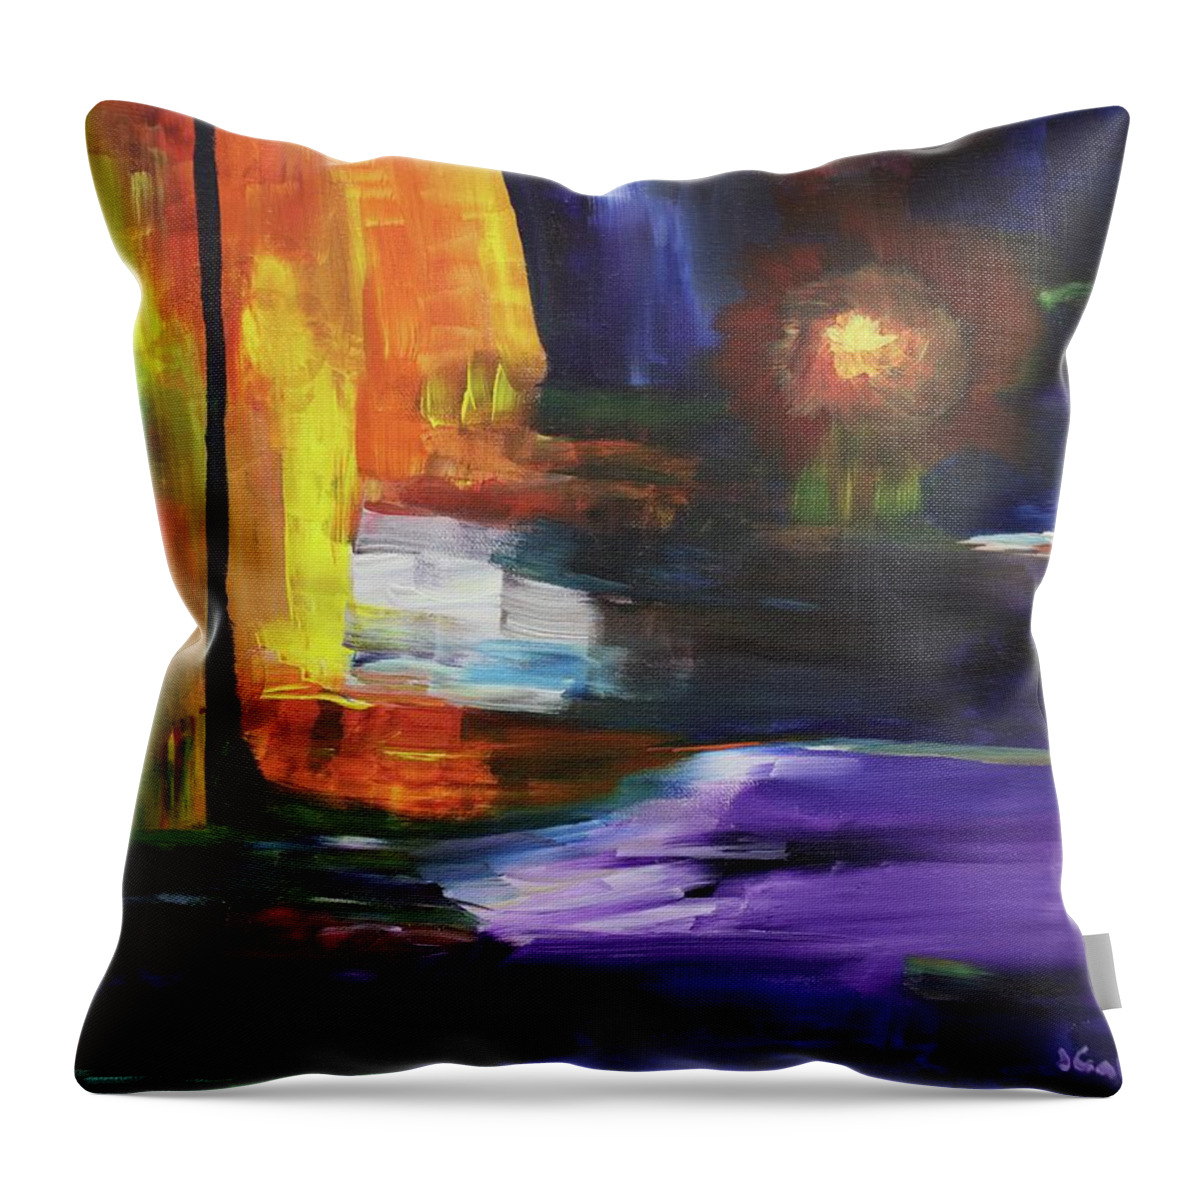 Abstract Throw Pillow featuring the digital art Dreamscape by Jennifer Galbraith